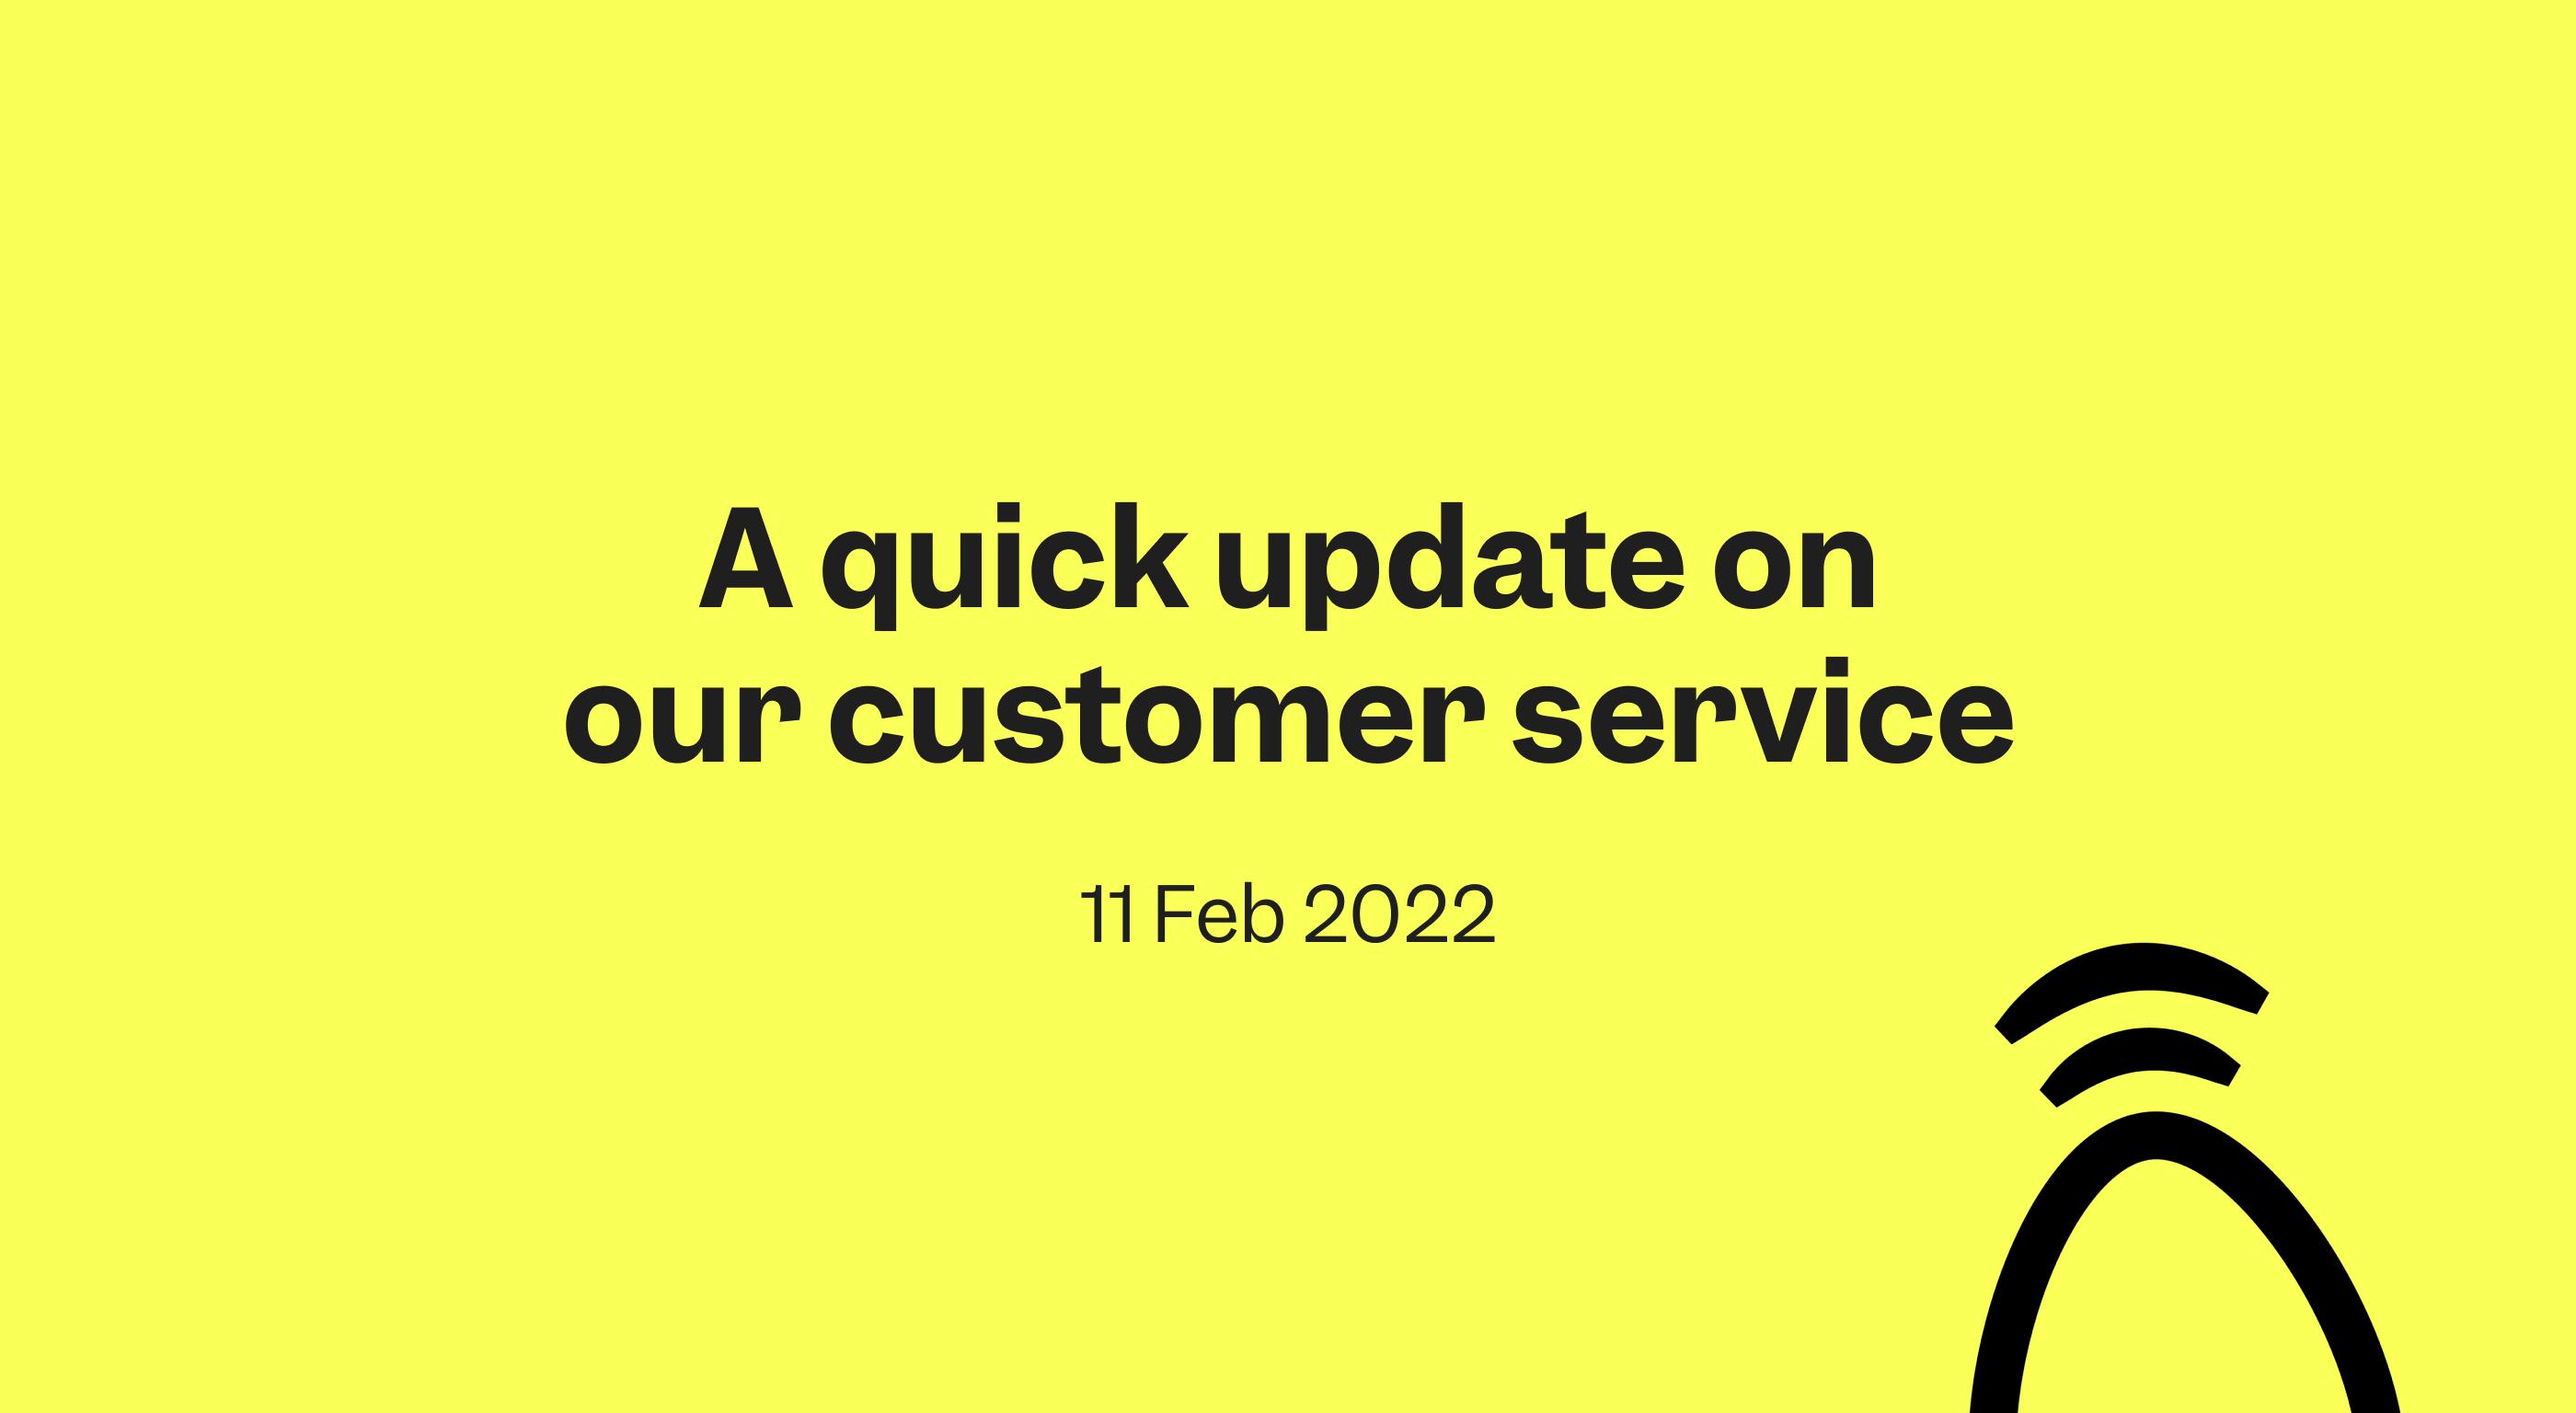 A quick update to our customer service